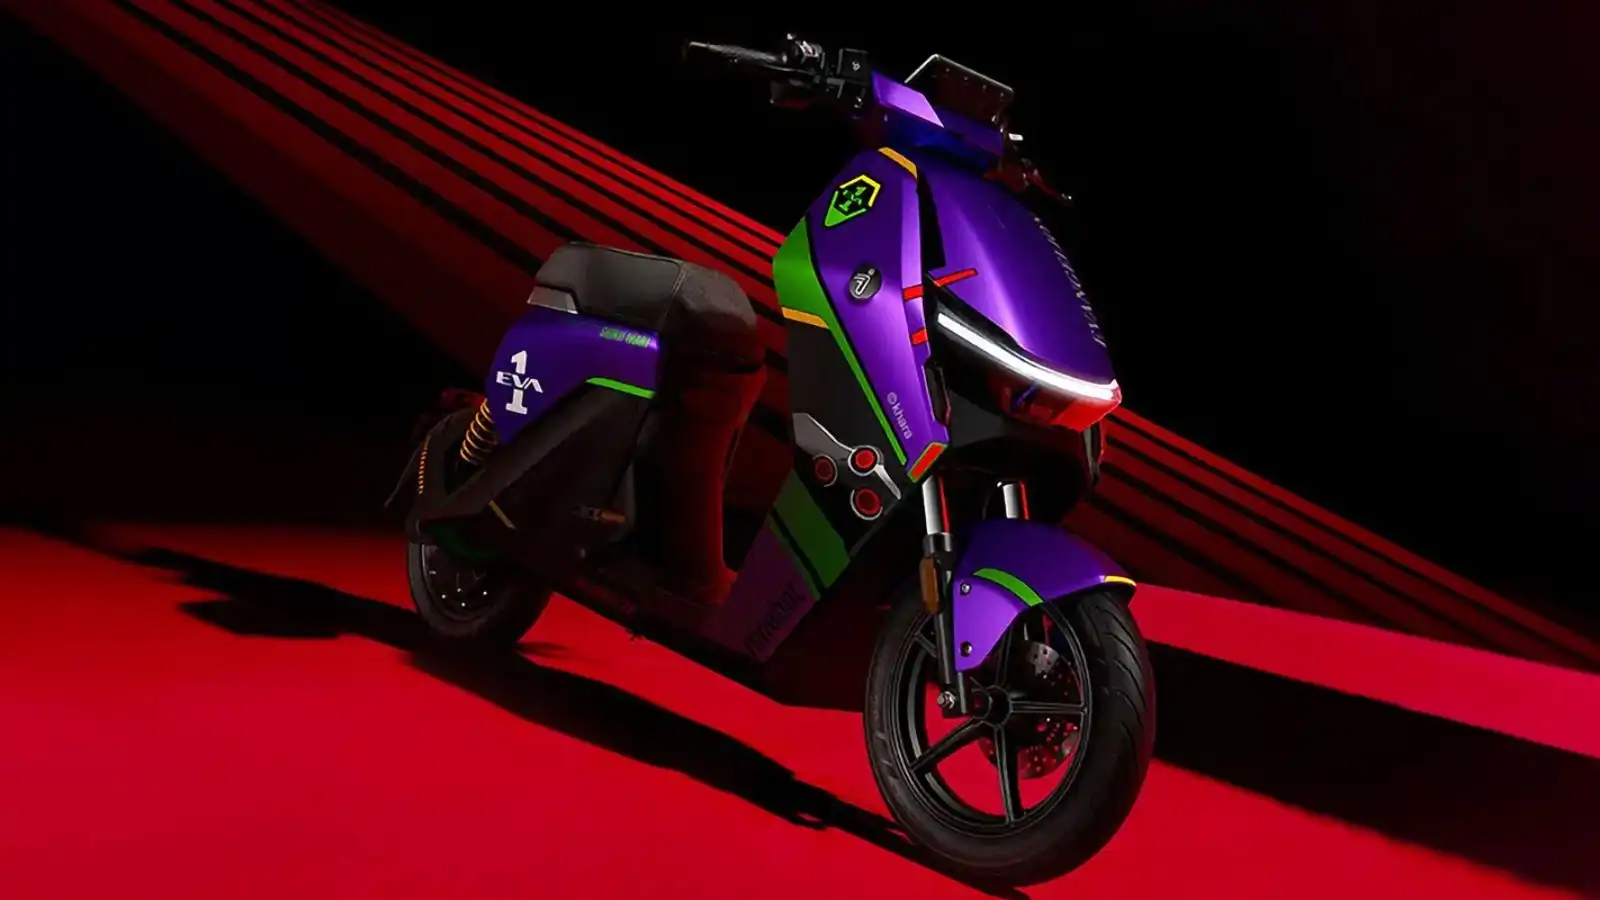 NINEBOT launches limited edition Dz 100P electric motorcycle inspired by the beloved Evangelion franchise!